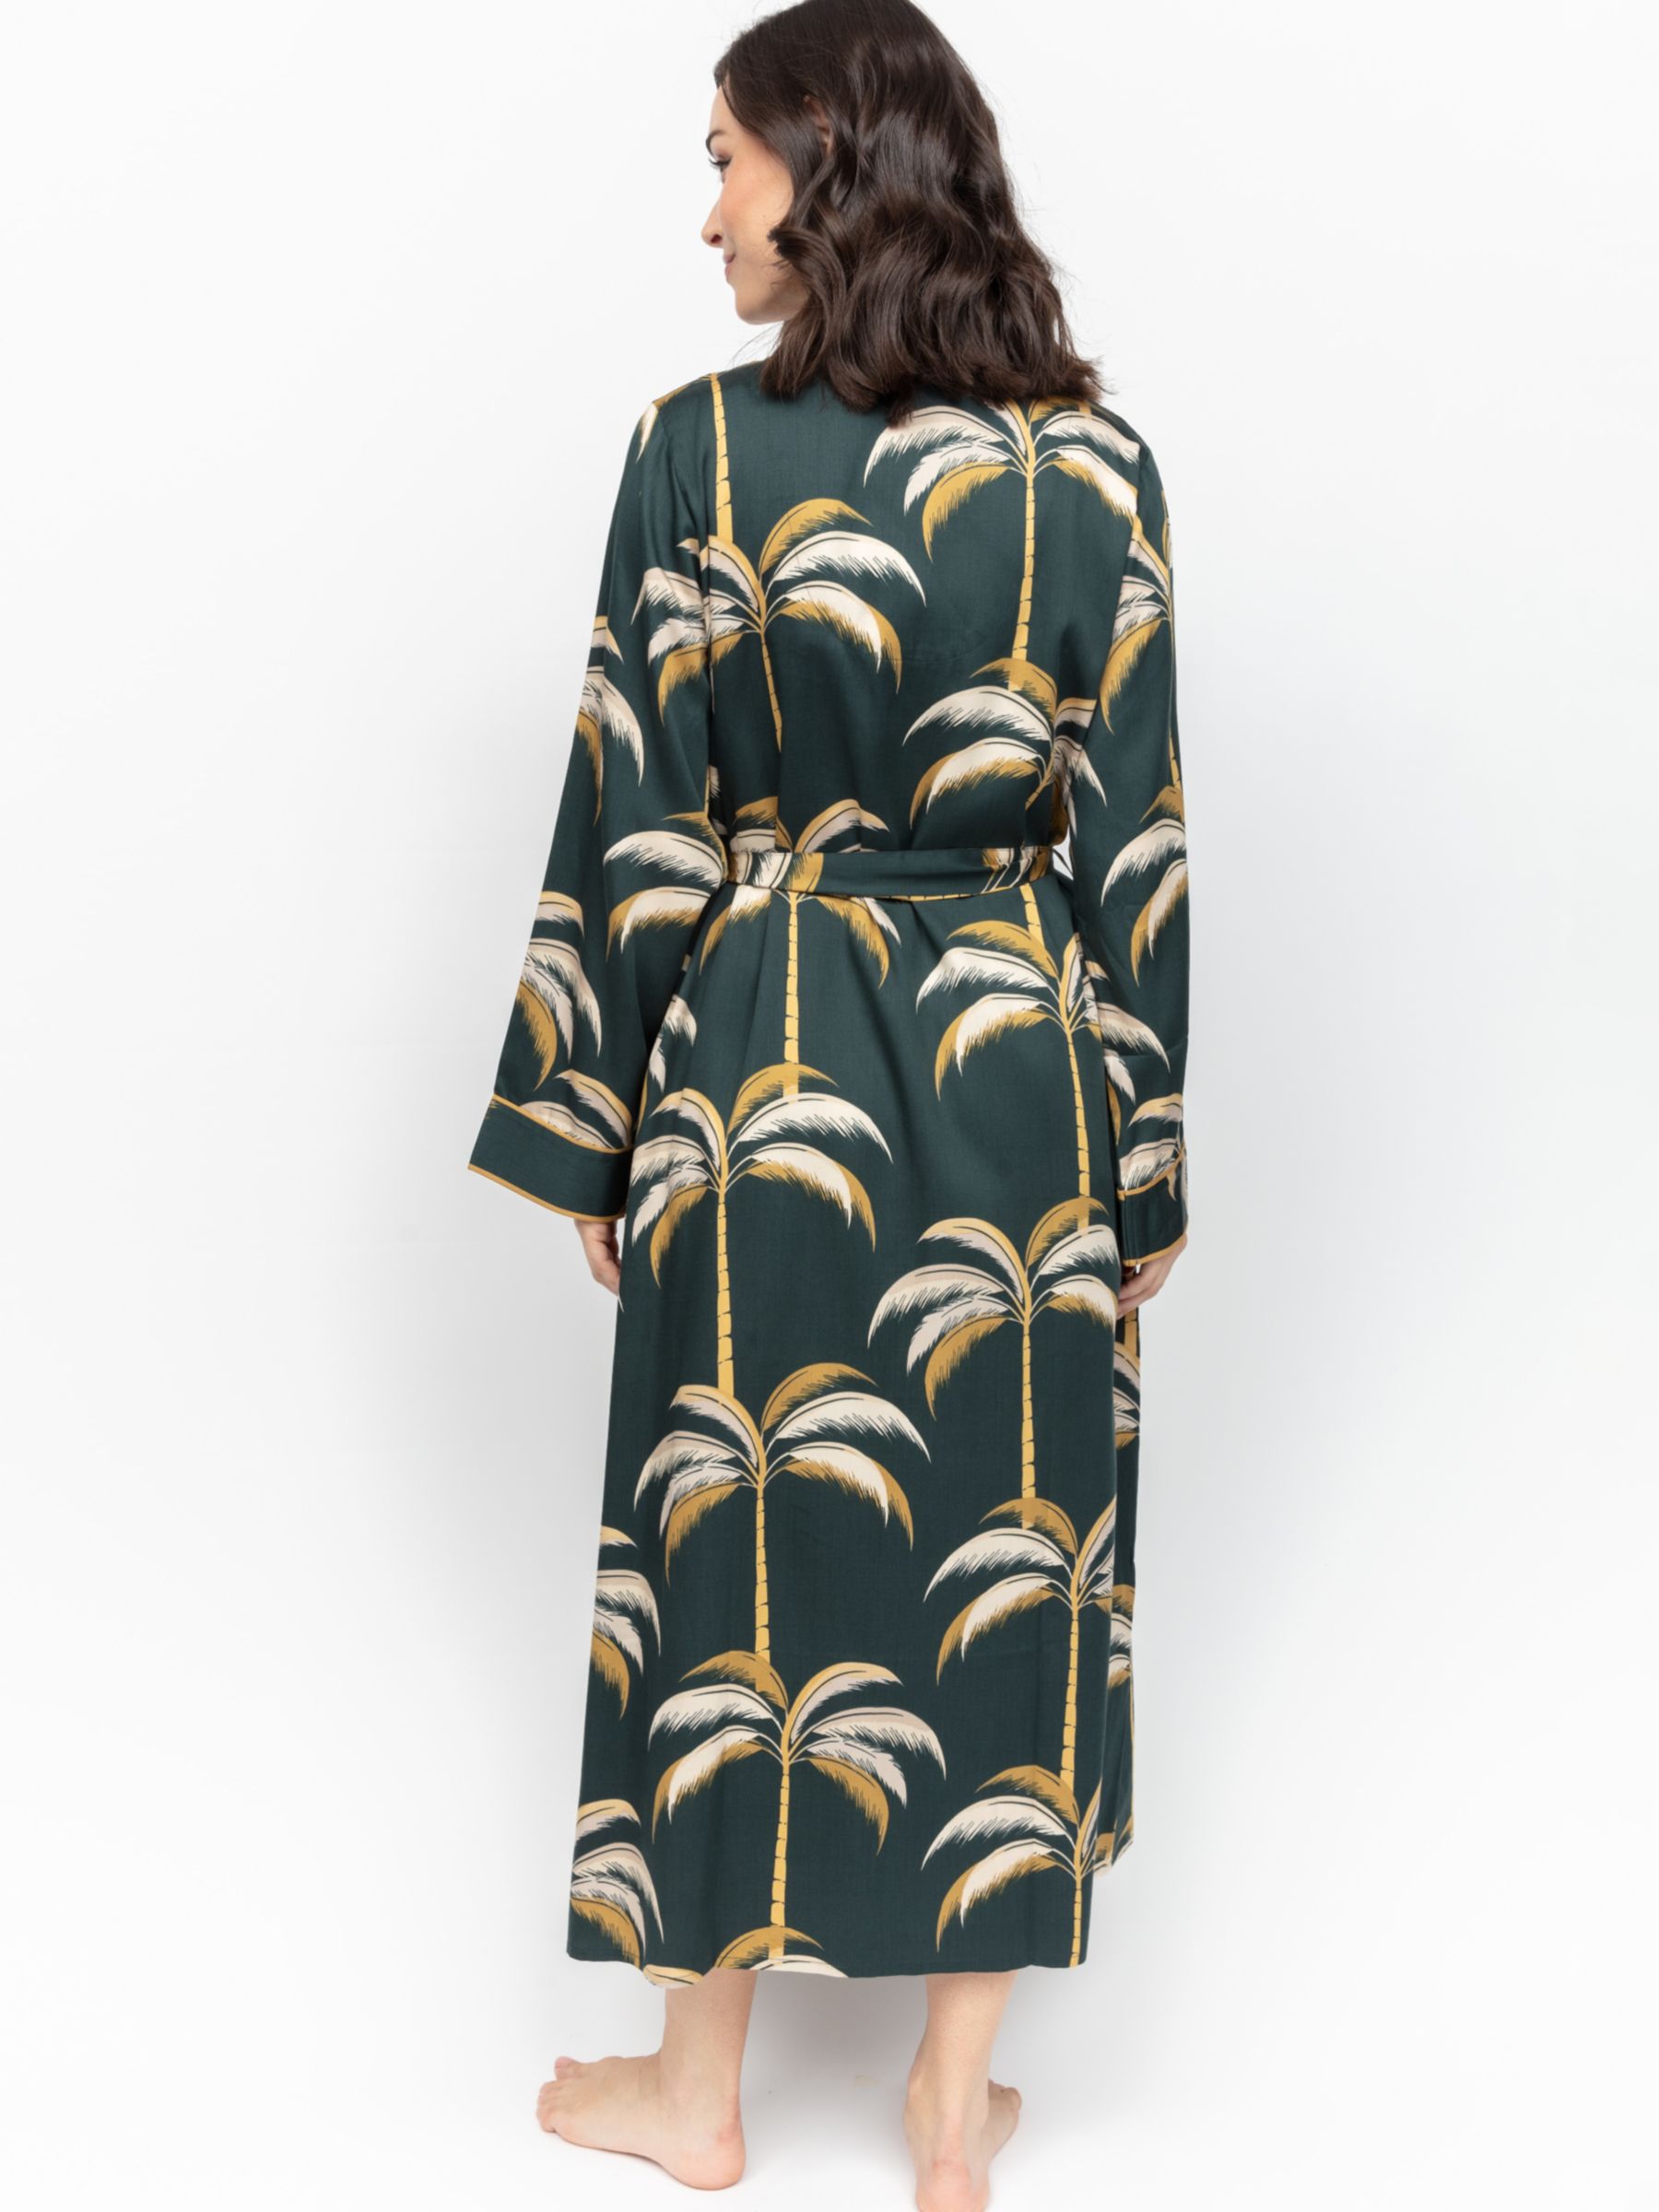 Fable & Eve Pimlico Palm Print Dressing Gown, Emerald Green, 8